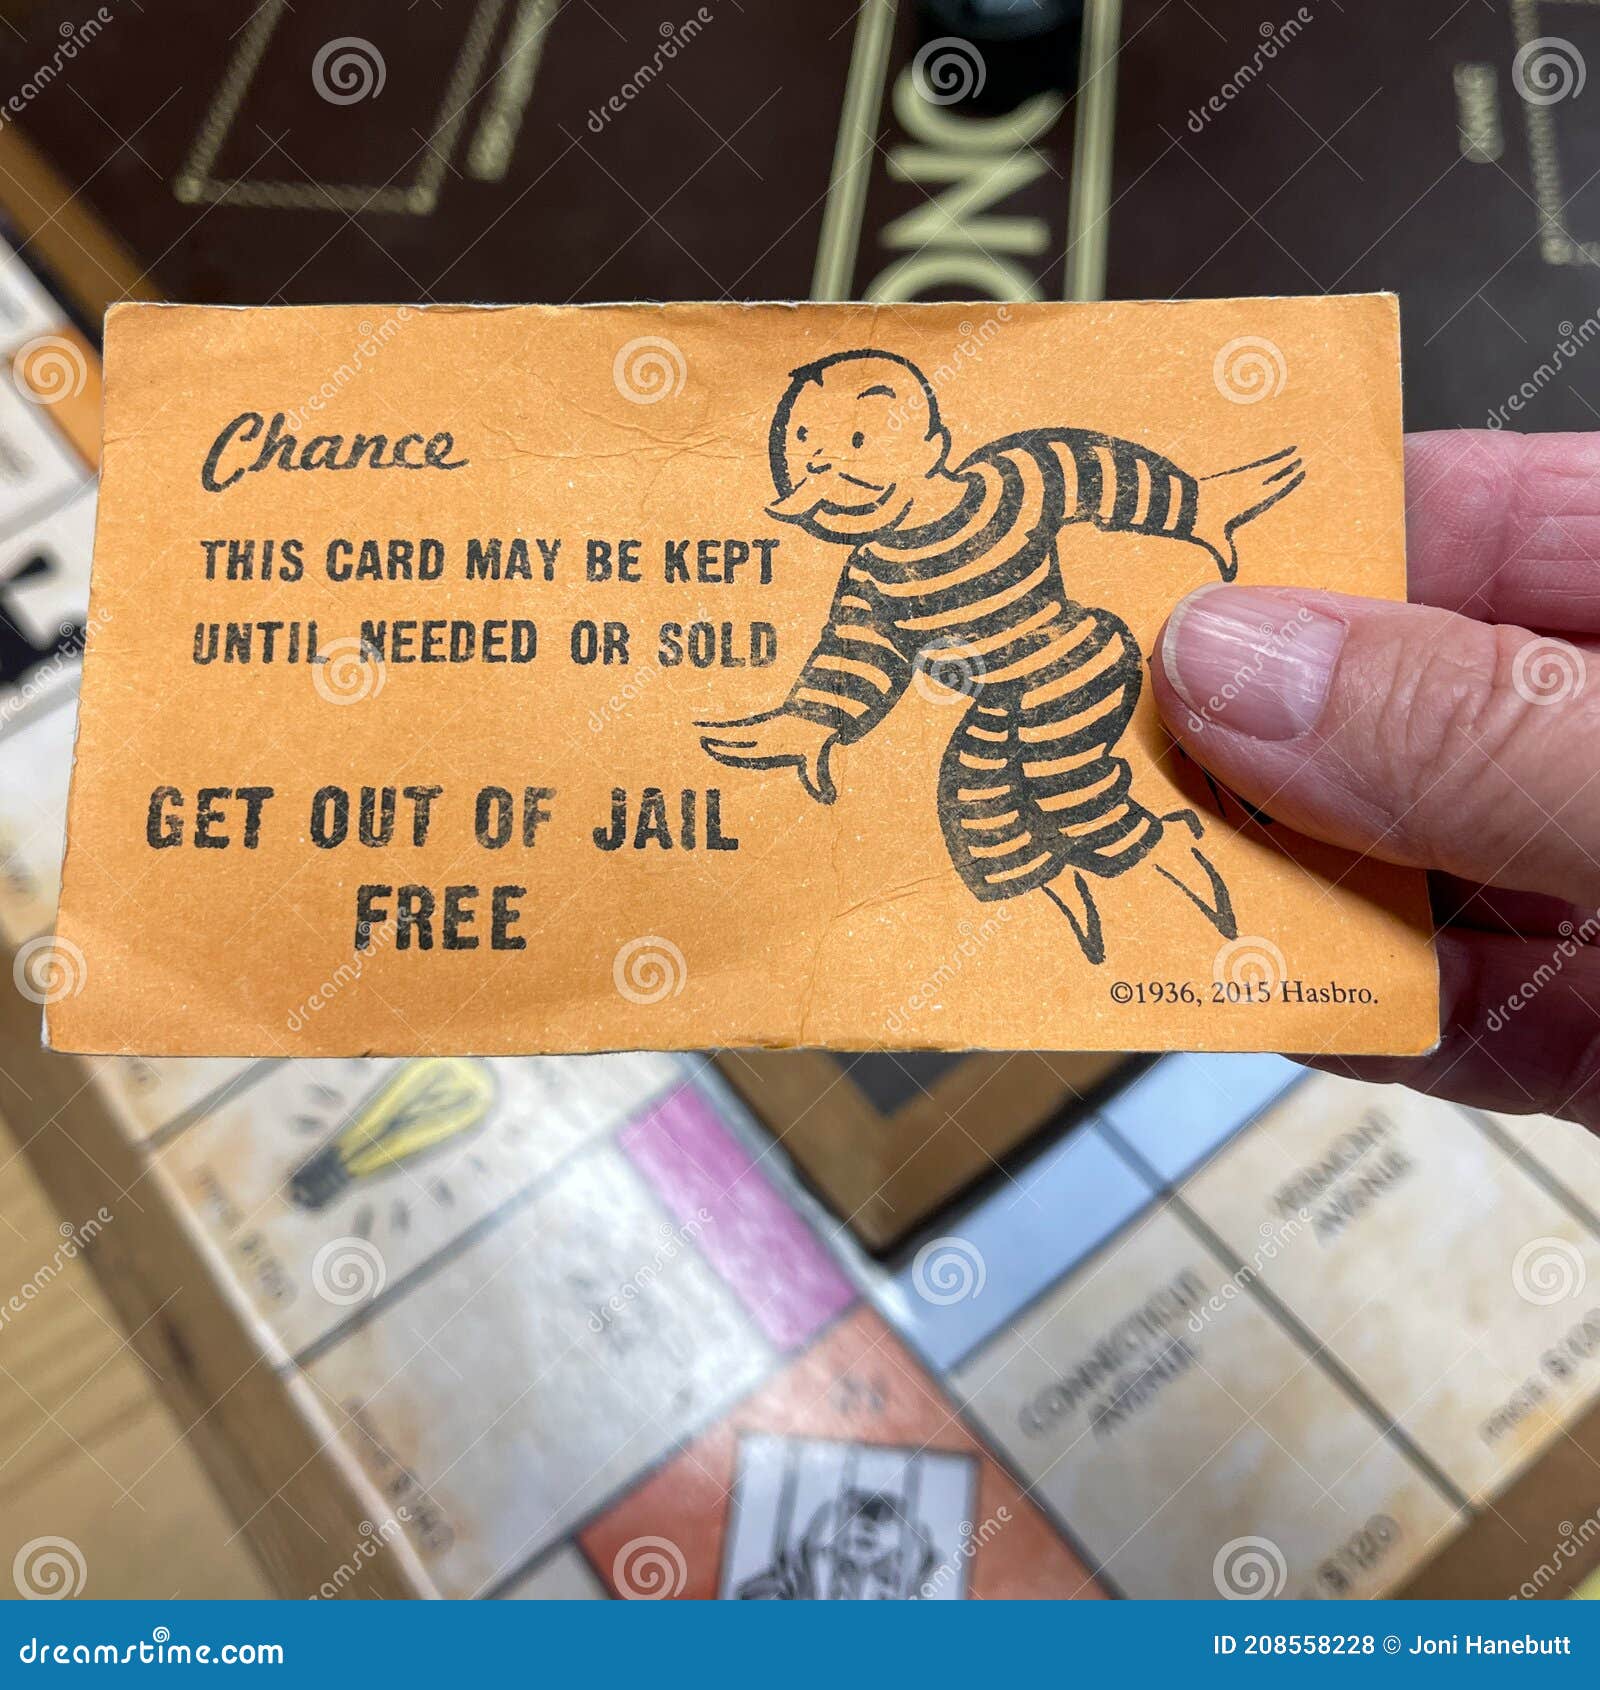 a-get-out-of-jail-free-card-from-a-monopoly-set-editorial-stock-photo